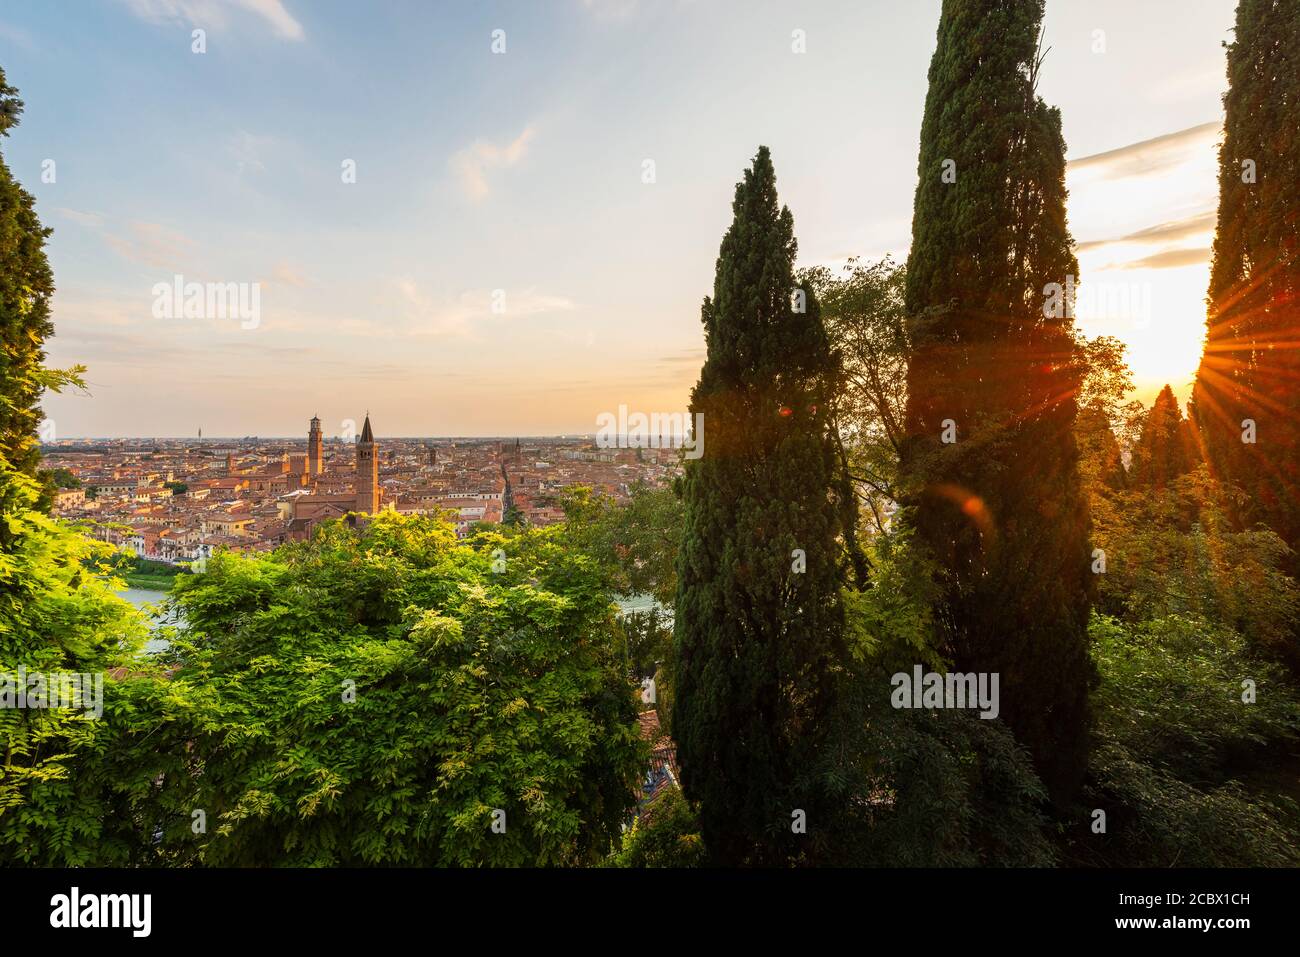 View through cypress trees at Castel San Pietro lookout on the sunset with sun stars over the old town of Verona, Italy Stock Photo